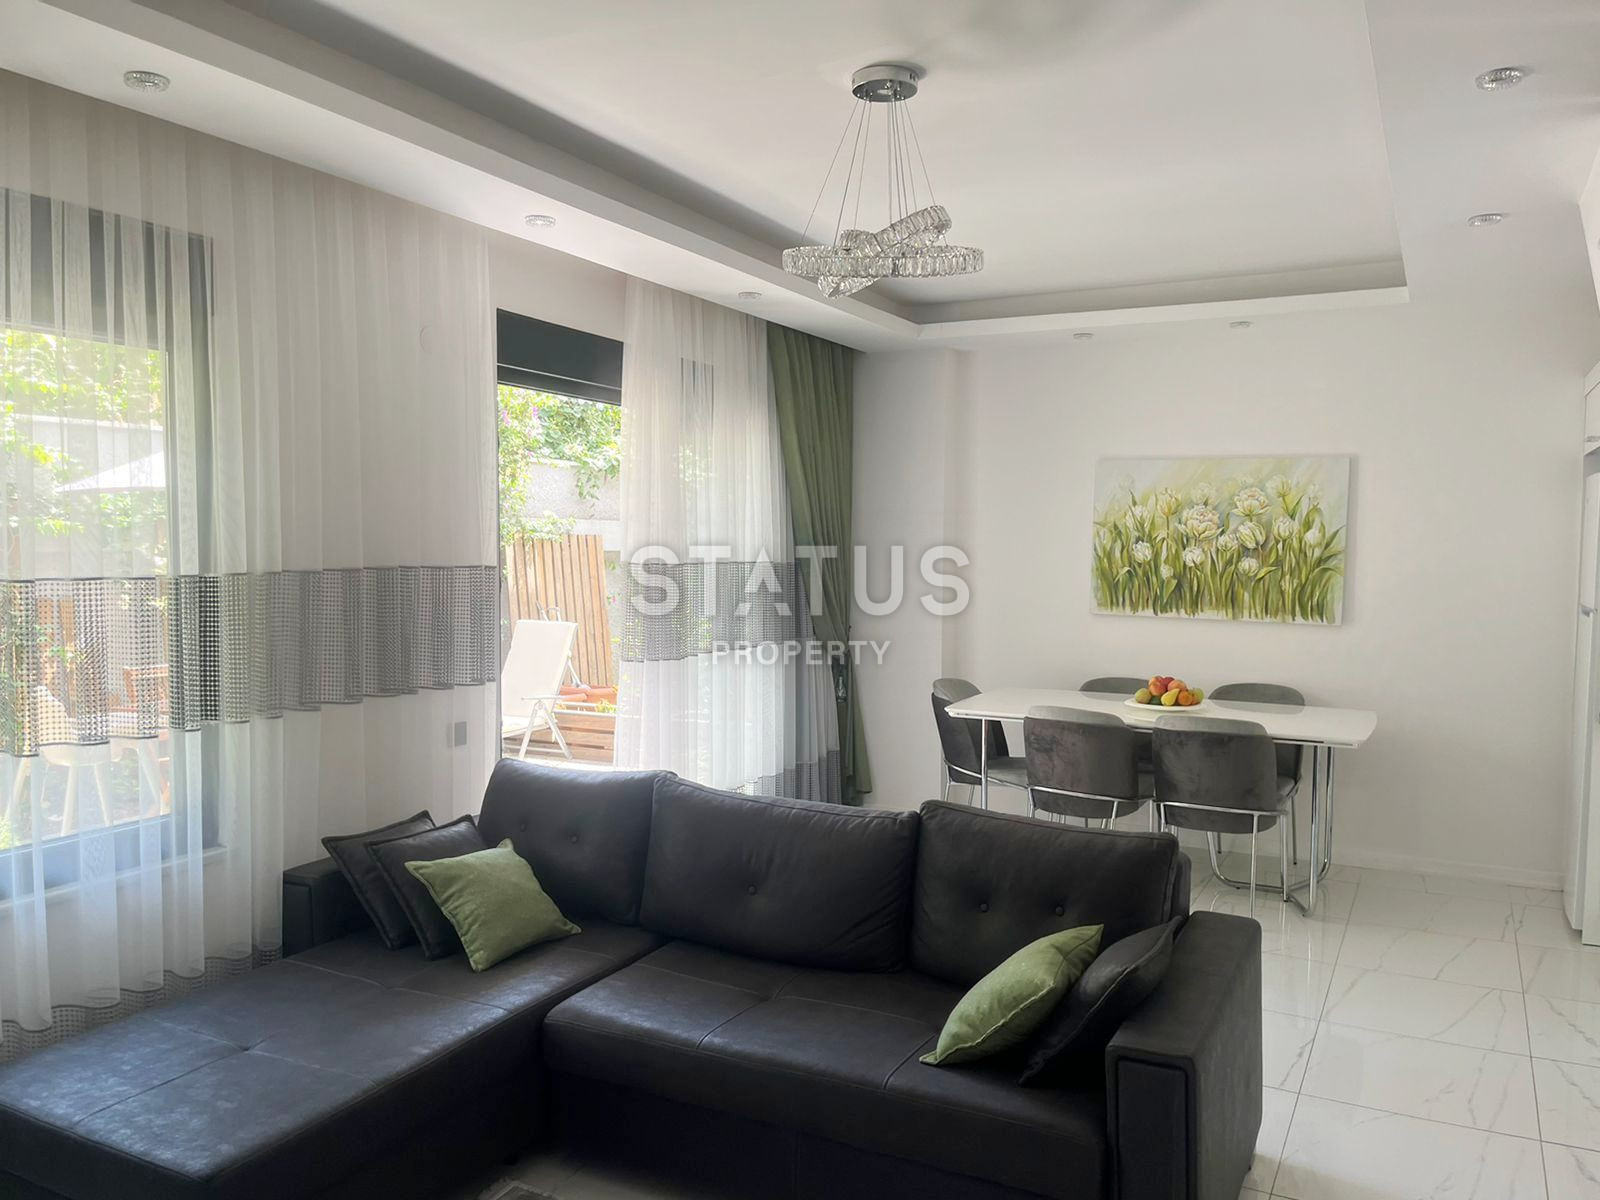 Duplex with private garden in the center of Alanya 200m from the sea. 140m2 фото 2